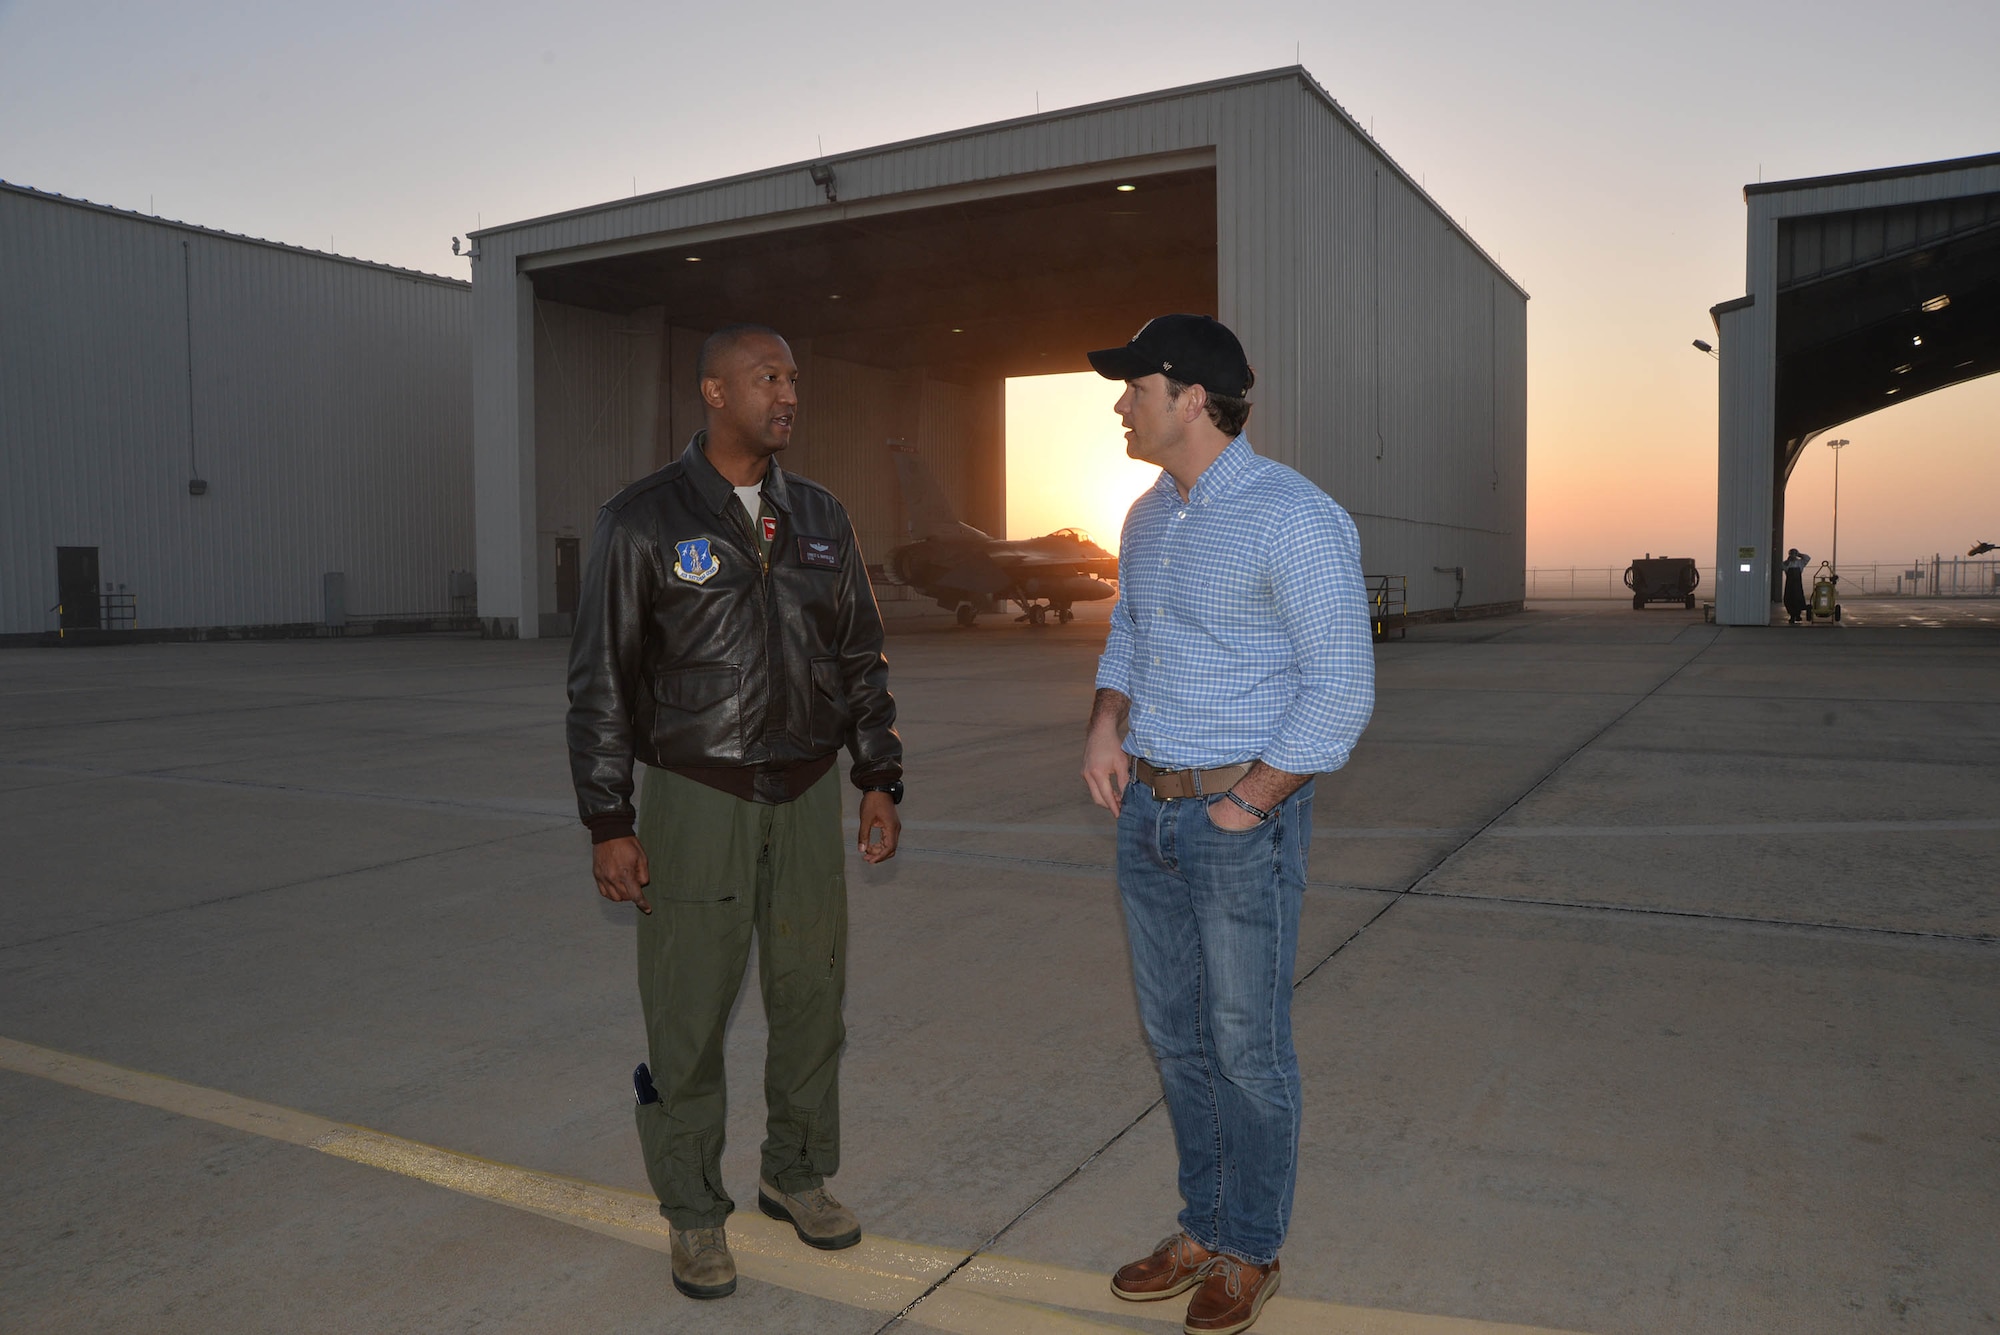 Lt. Col. Ernie Mayfield, Director of Operations, 138th Fighter Wing, Det. 1, talks with Peter Hegseth, Fox & Friends television news contributor, as day breaks during the morning of Hegseth’s aerospace defense familiarization flight. Hegseth flew with the unit as part of a Continental Aerospace Defense Region communications outreach plan to help enhance public knowledge about temporary flight restrictions during high-profile events such as Super Bowl LI. (Photo released by Mary McHale)